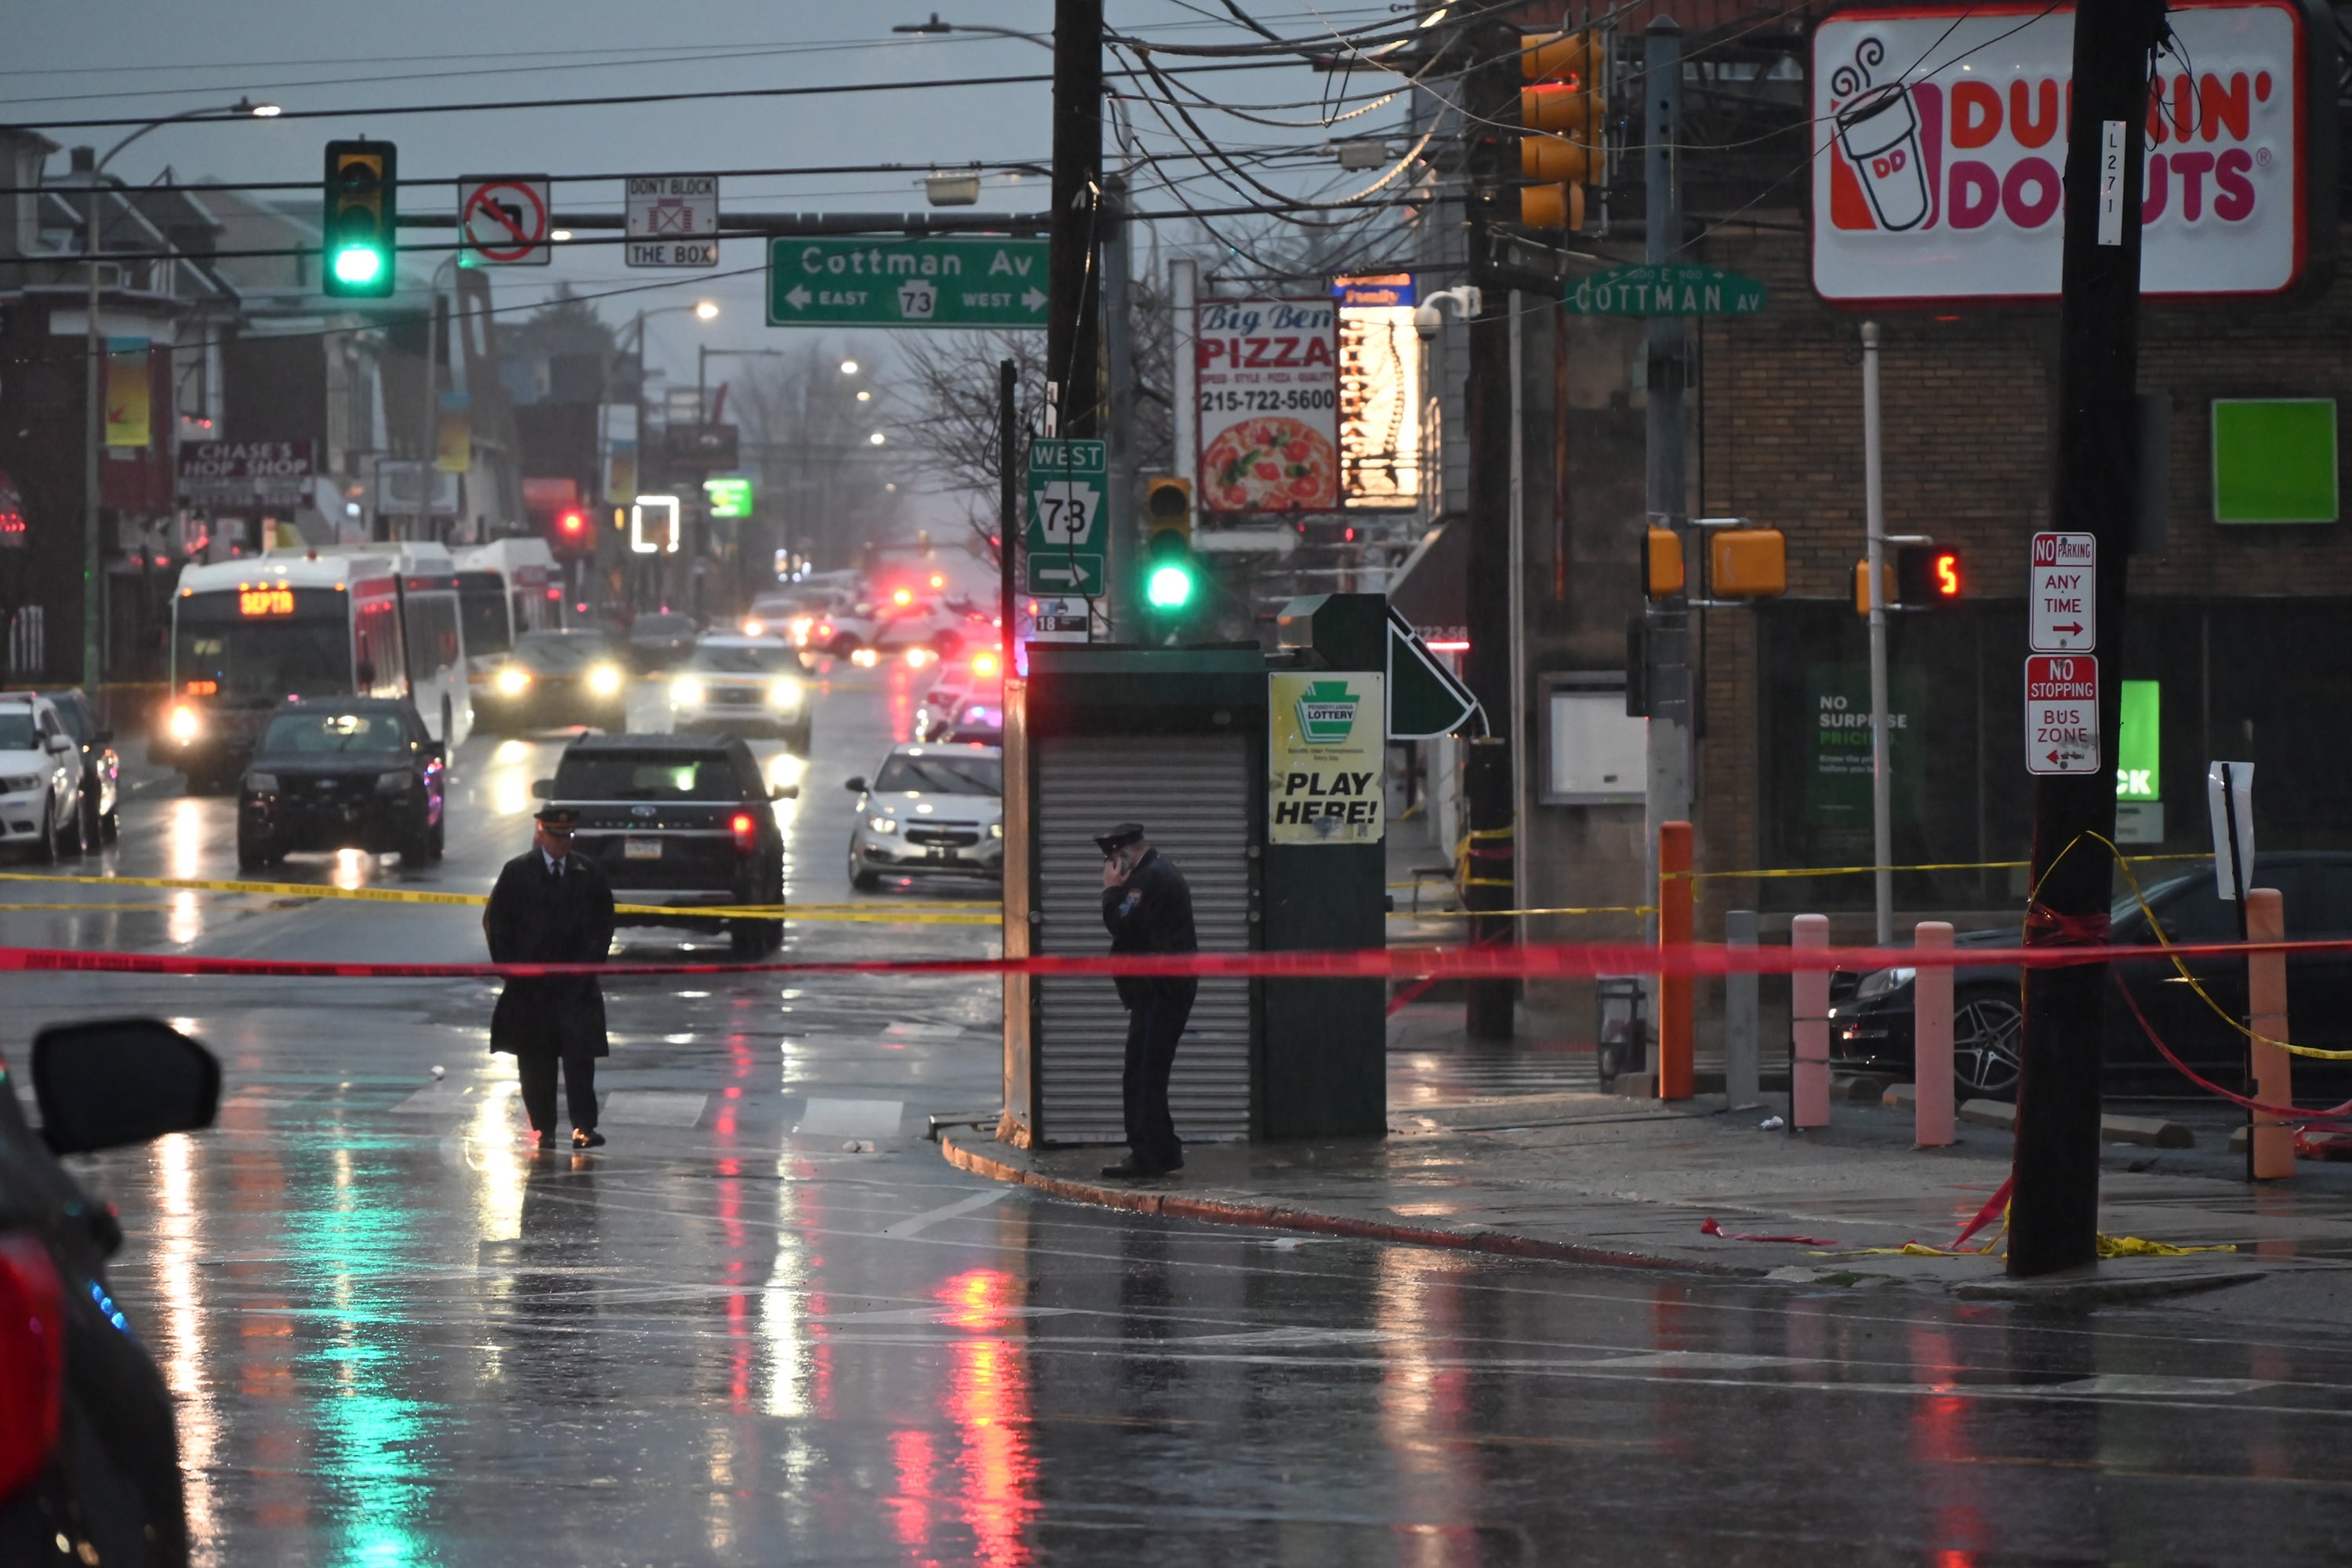 Two police officers stand on the sidewalk and in the street with a red caution tape across the street with cars in the background.